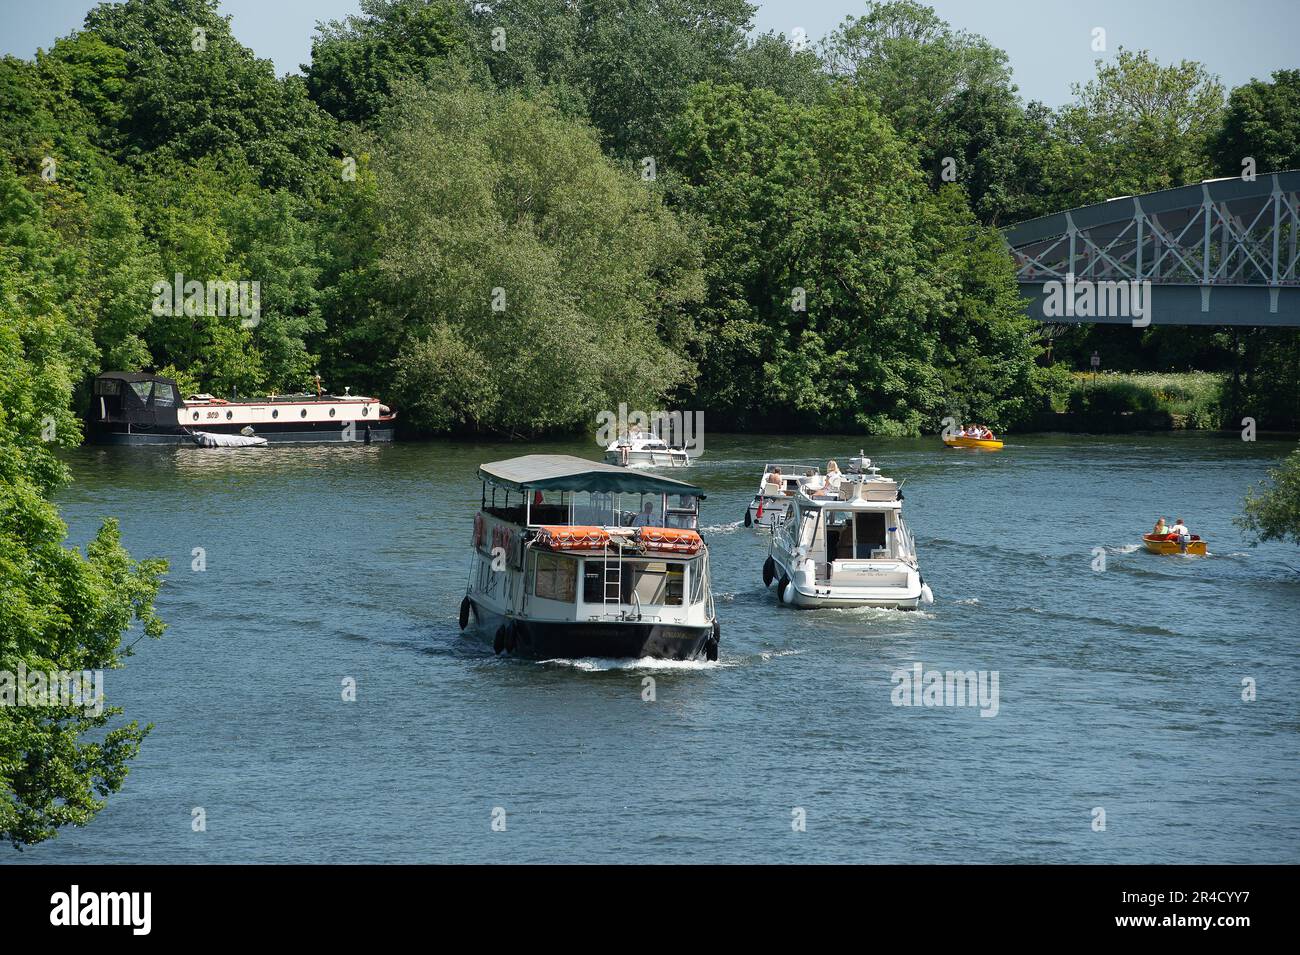 Windsor, Berkshire, UK. 27th May, 23. It was a beautiful warm and sunny day in Windsor, Berkshire today. A lot of people bring their cruising boats down to Windsor for the bank holiday weekends. Credit: Maureen McLean/Alamy Live News Stock Photo